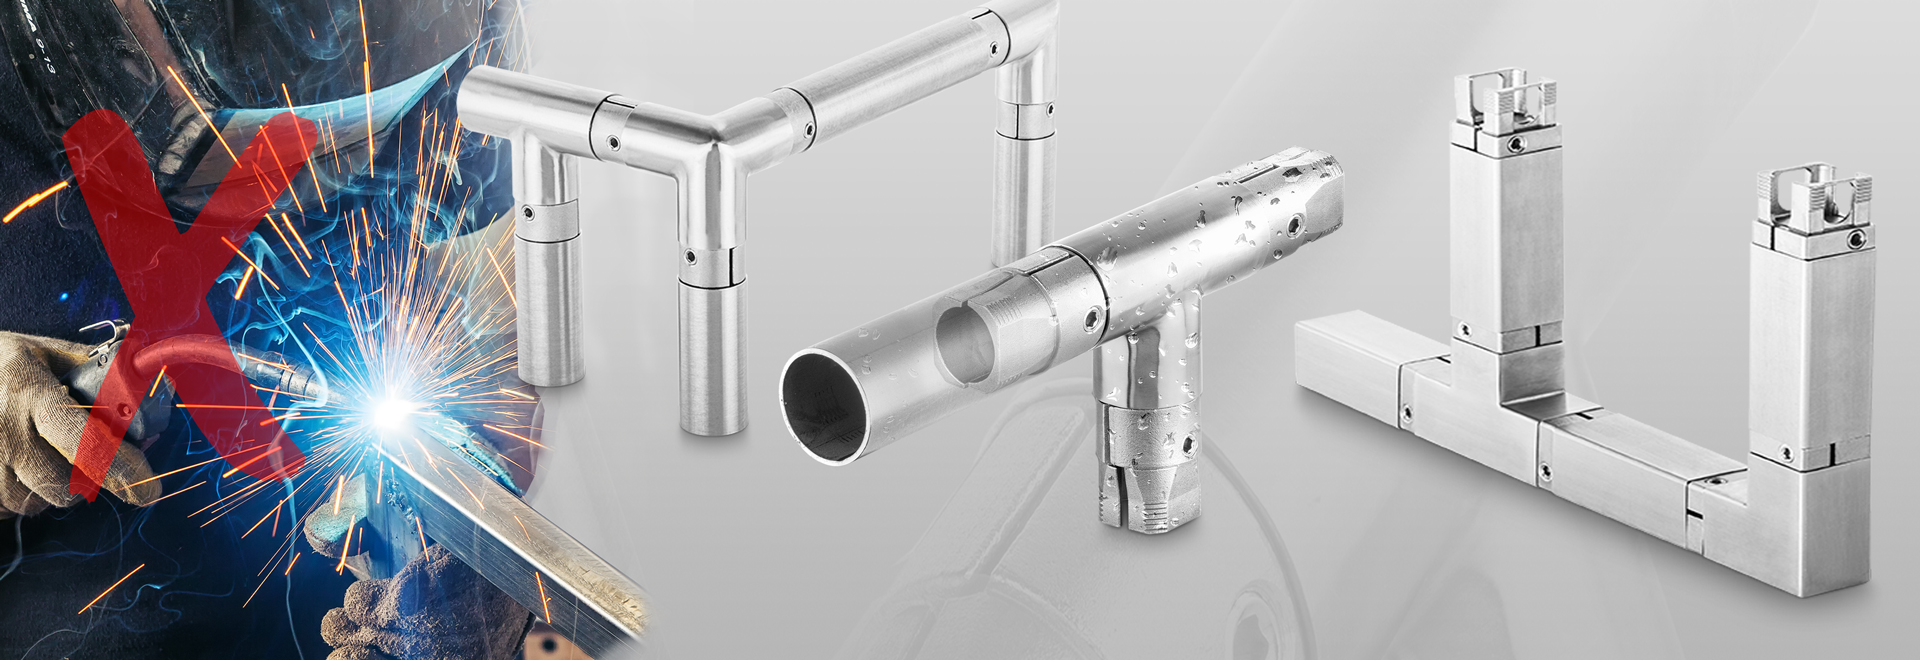 Stainless steel assembly system (EMS)